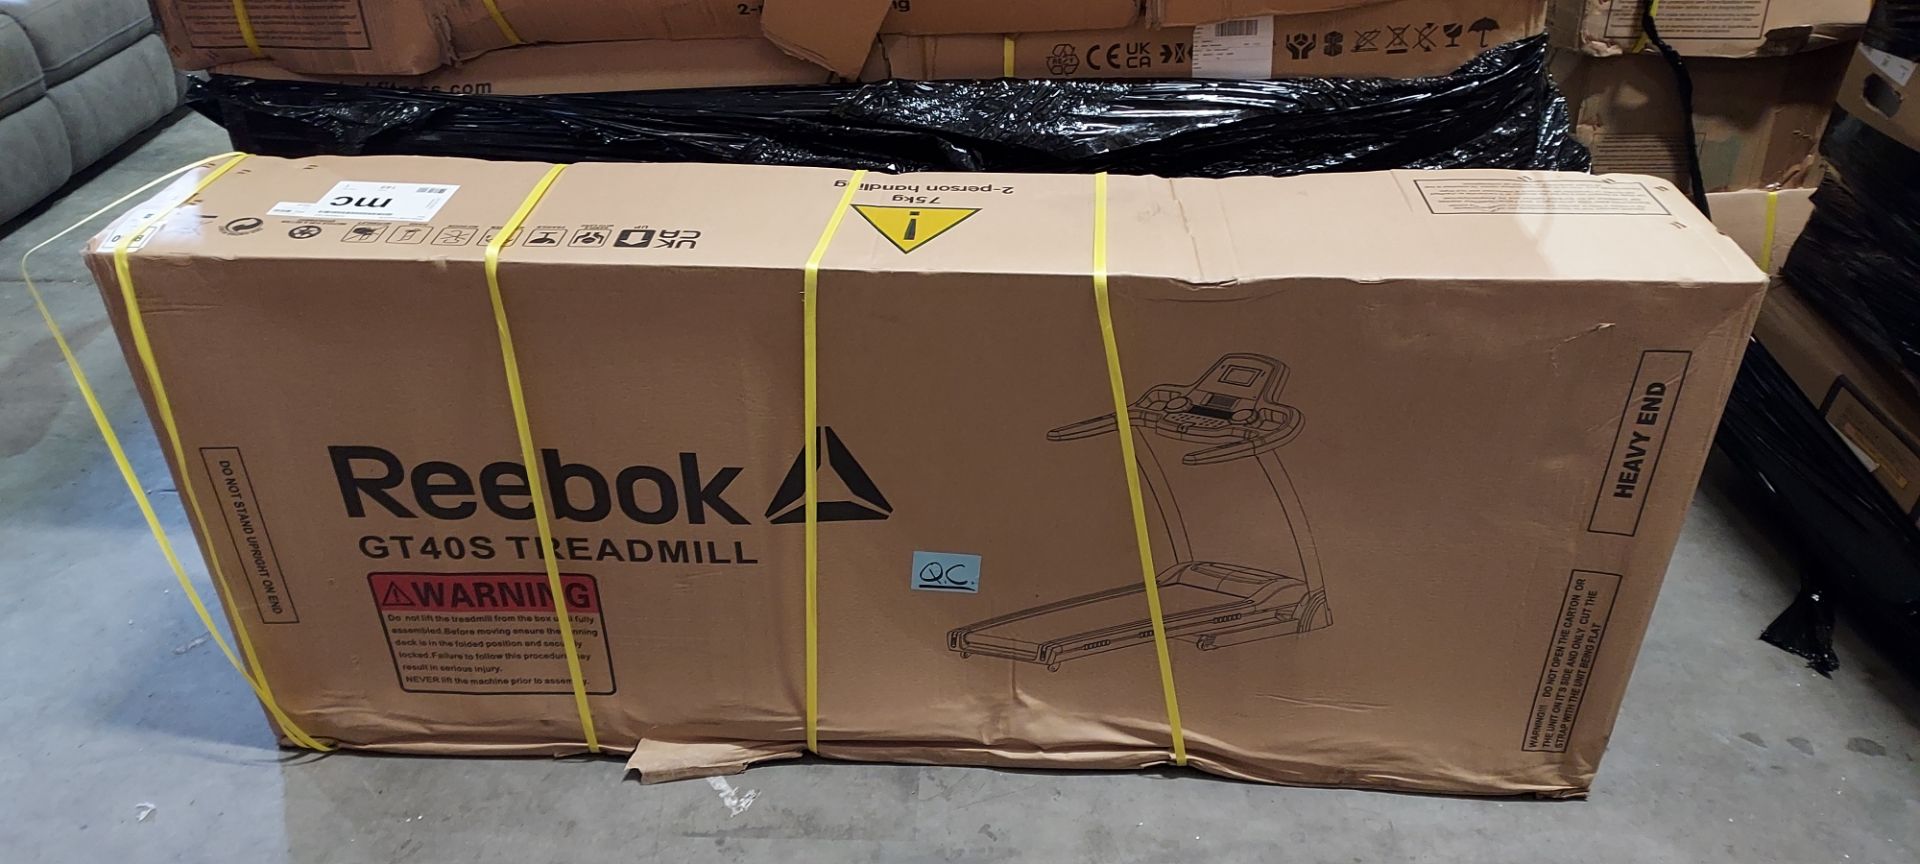 1 X BRAND NEW FACTORY SEALED REEBOK GT40S TREADMILL 00 IN BLACK GROSS WEIGHT 75KG (NOTE BOX SLIGHTLY - Image 2 of 2